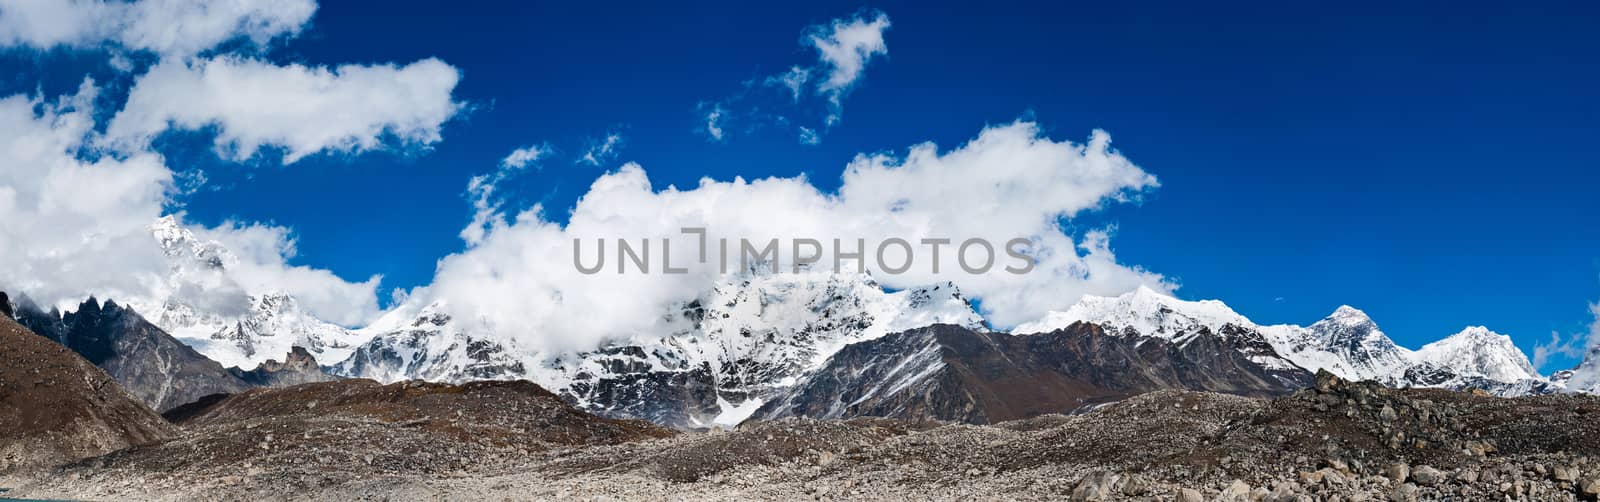 Himalayas panorama with Mountain peaks and Everest summit. Extralarge resolution